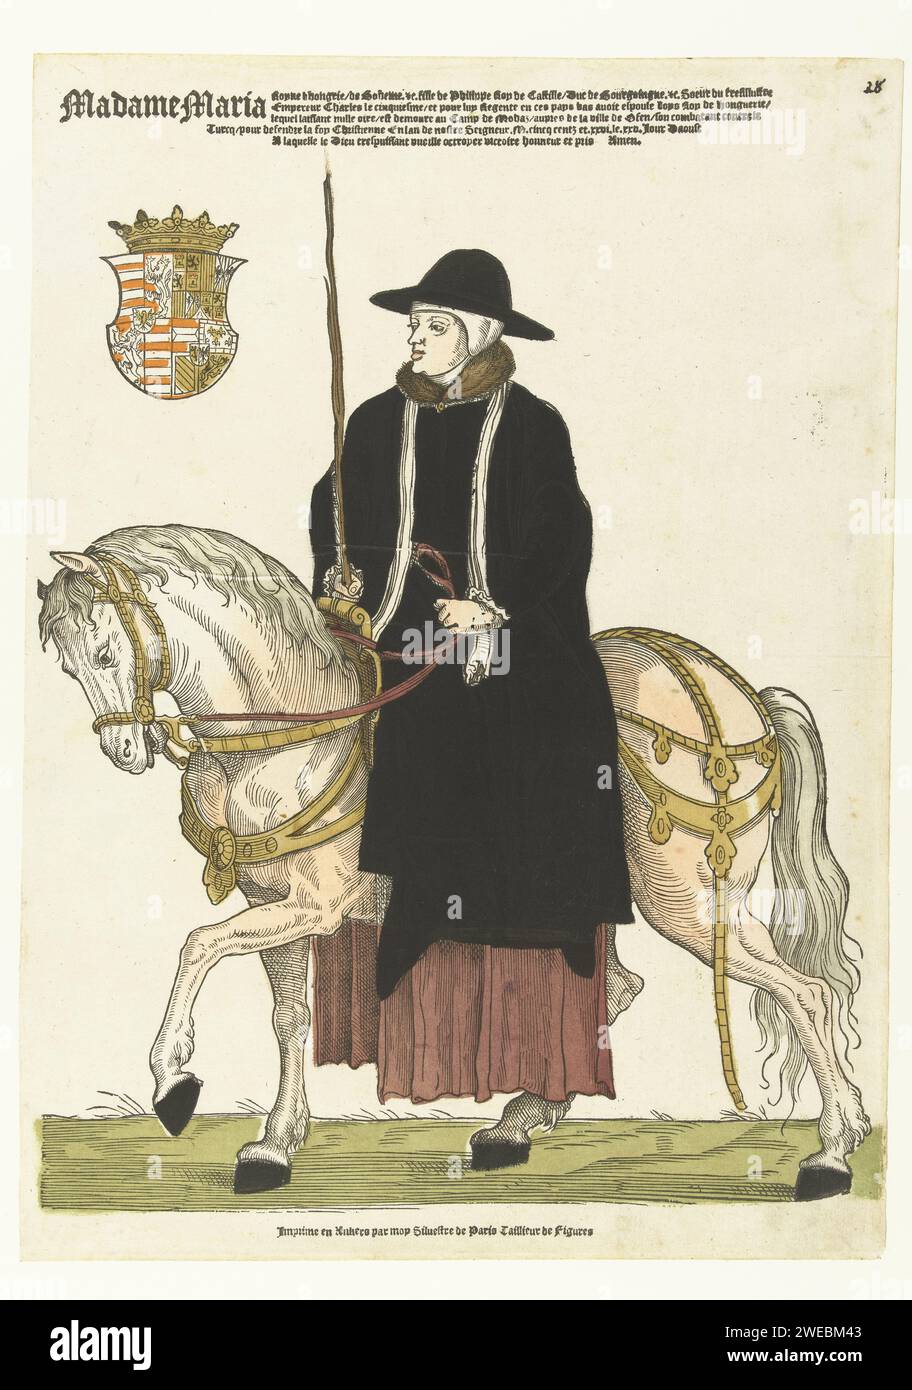 Portrait of Maria van Hungary on horseback, Cornelis Anthonisz. (Manner of), 1538 - 1553 print Maria van Hungary (1505-1558), younger sister of Charles V, Queen-Widow of Hungary, from 1531 to 1555 Regentes of the Netherlands. Her husband Louis II of Hungary died in the Battle of Mohacz against the Turks in 1526. The regent has been dressed in black since that year with the white widow hood. She is so repeatedly depicted in boste portraits. Here she is depicted as a rider in travel clothing on a stepping horse to the right. At the top left her weapon. Low Countriespublisher: Antwerp paper  eque Stock Photo